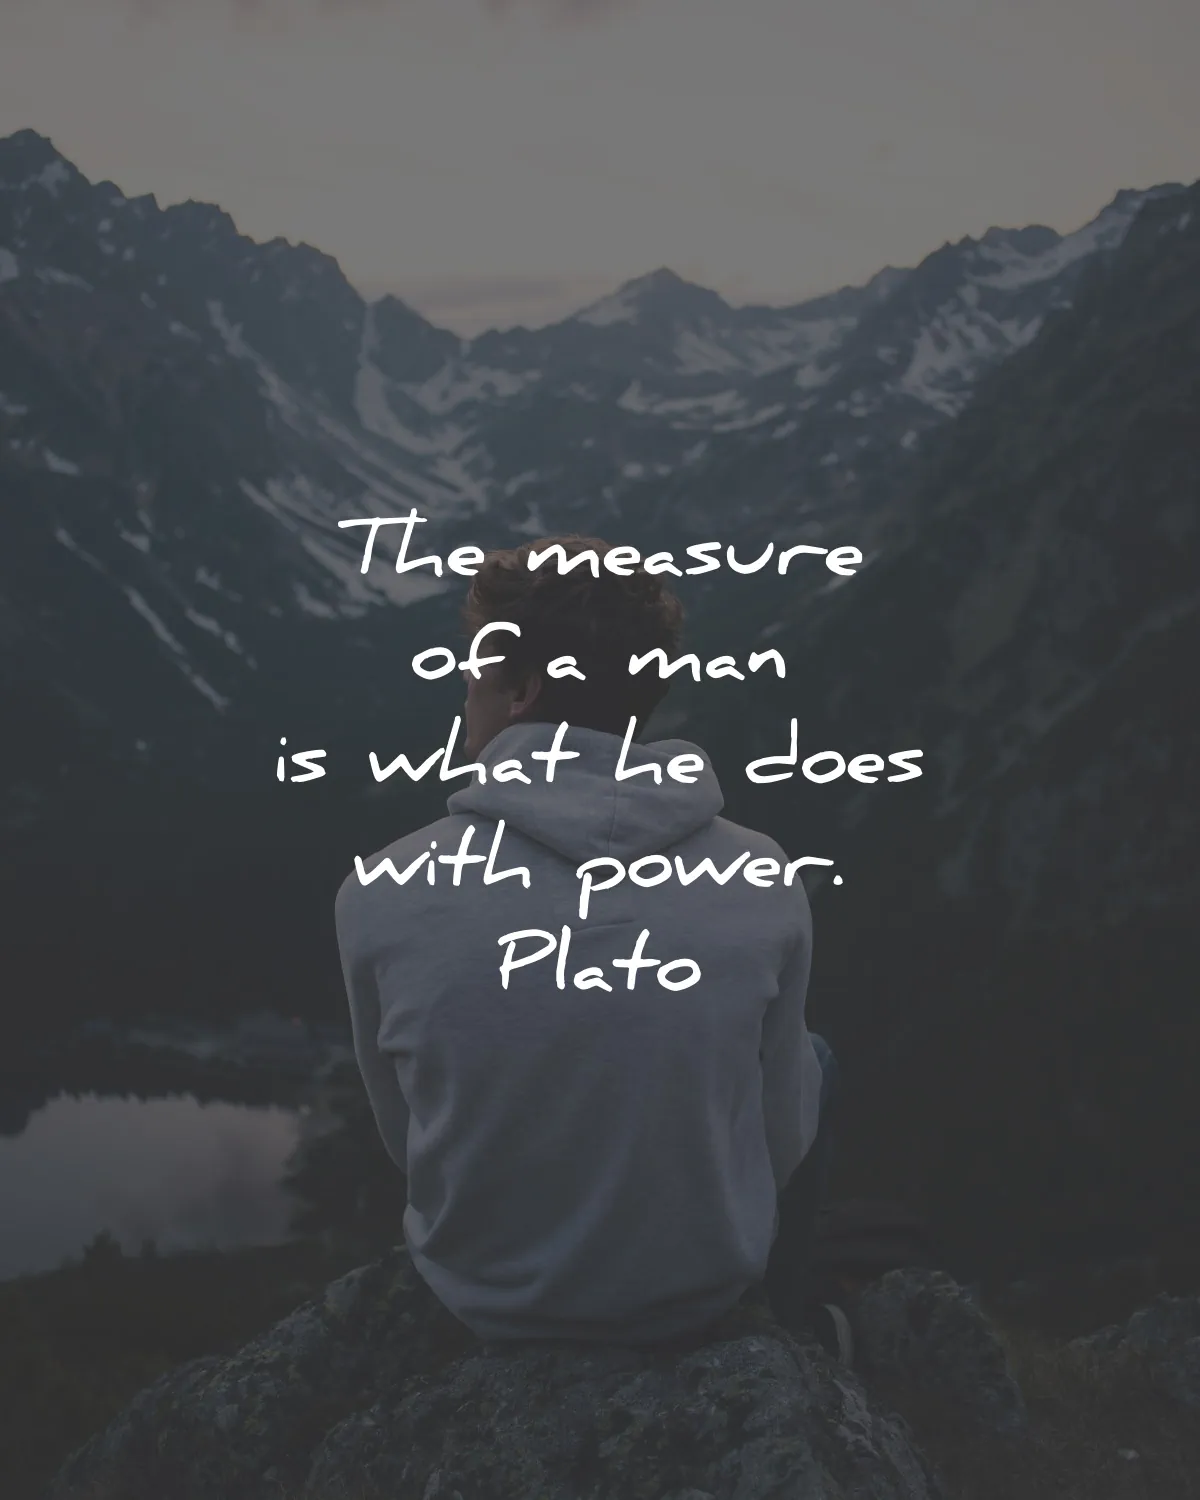 plato quotes measure man what does power wisdom